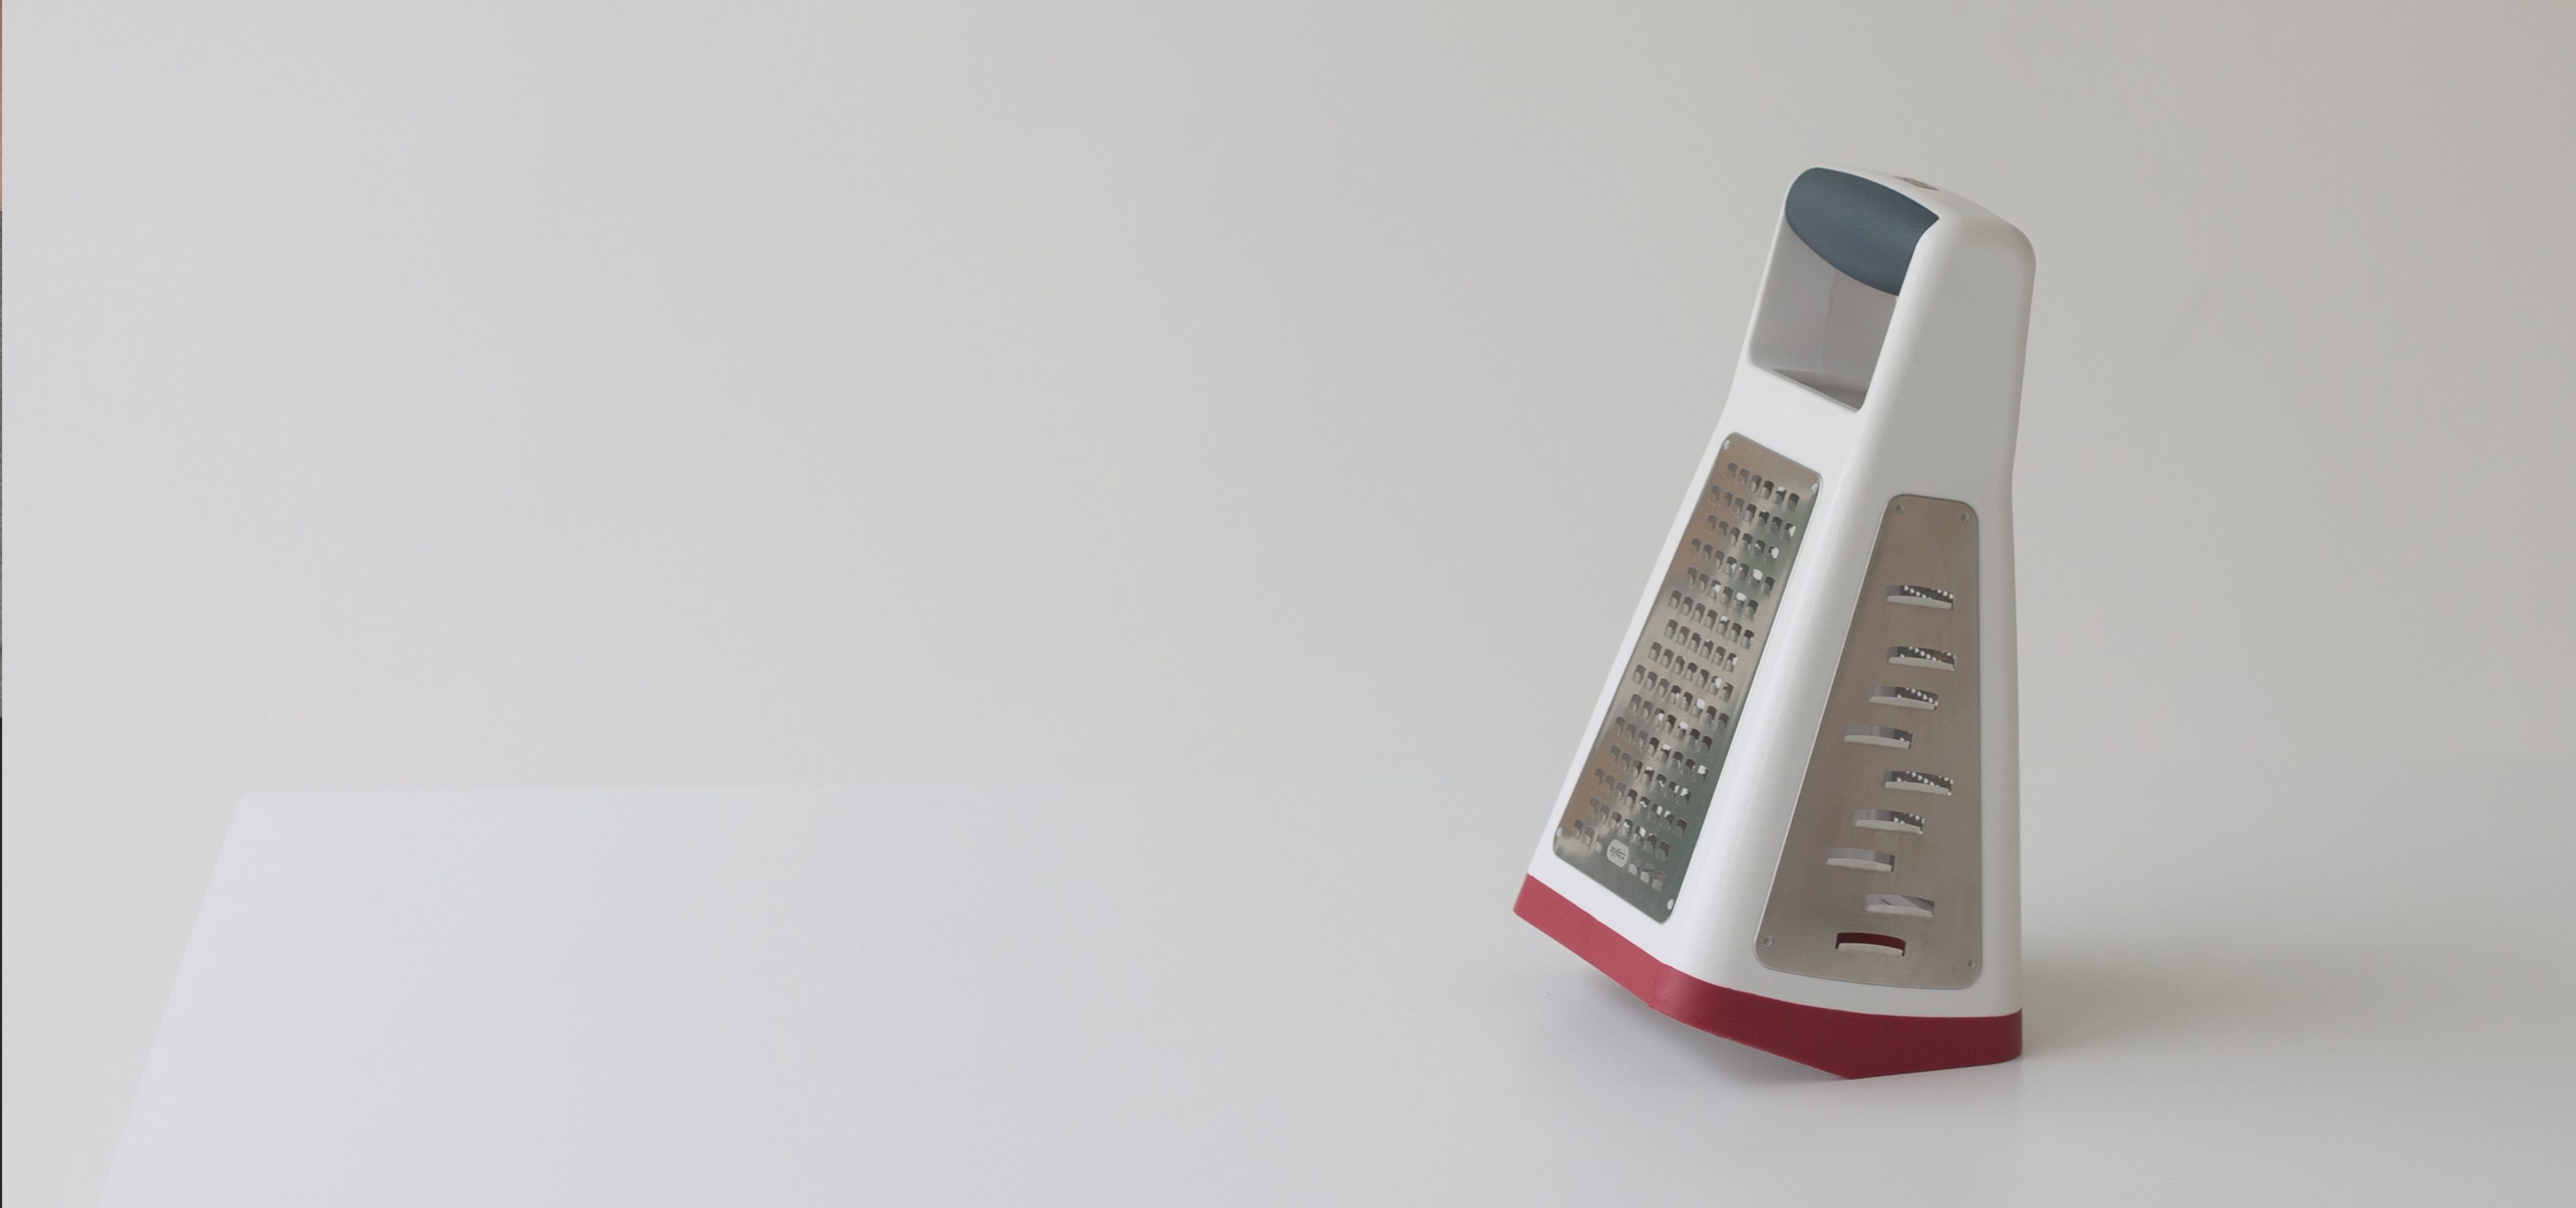 Innovate with insights. The Zyliss tilt and grate grater designed by Rodd.